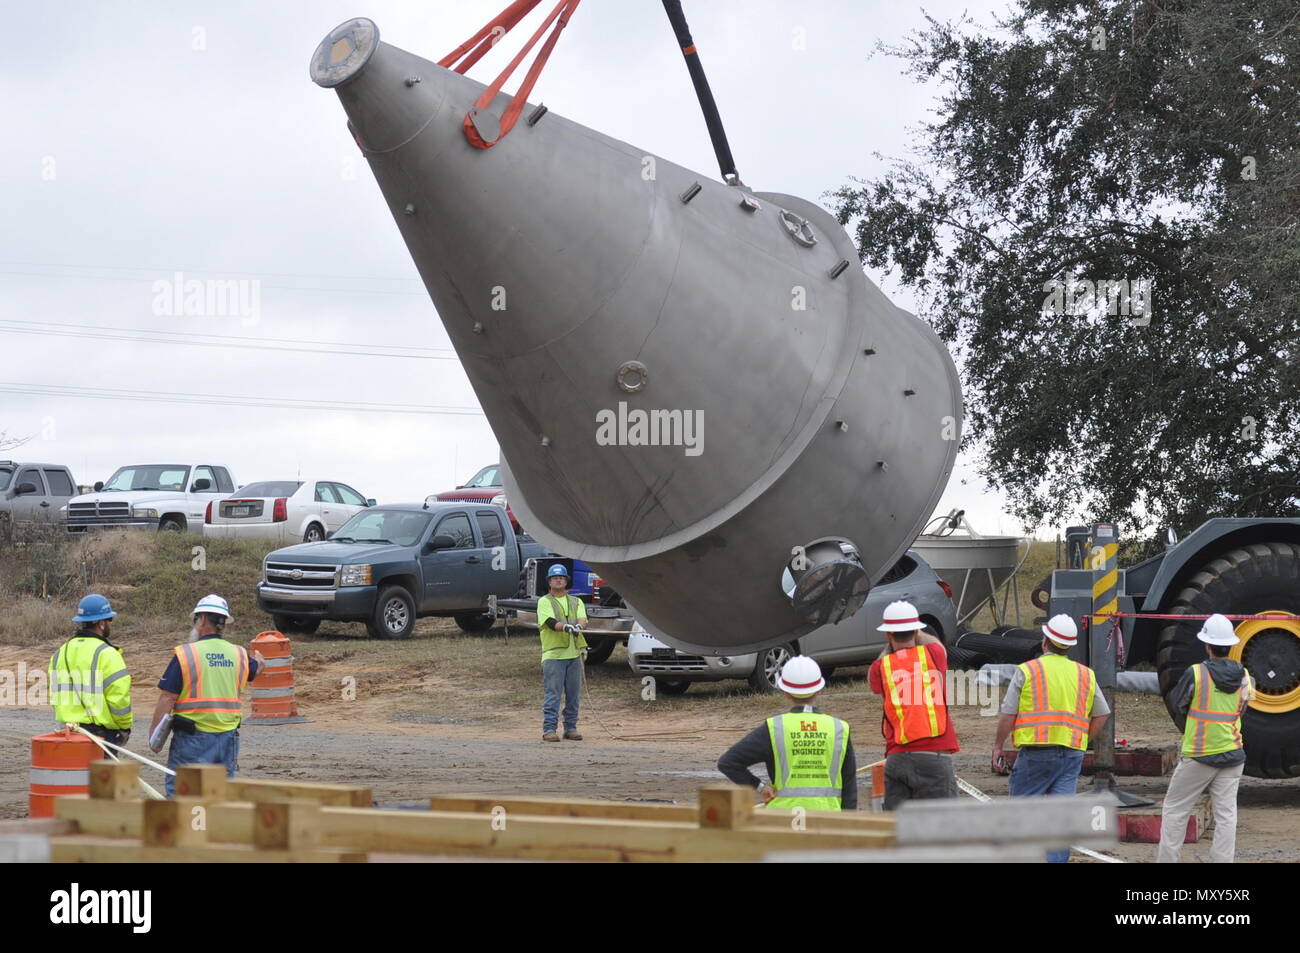 Workers unload four Speece cones delivered Dec. 14, 2016, to an Army Corps of Engineers site along the Savannah River. The Speece cones, each about 22 feet tall when installed, will dissolve pure oxygen into water extracted from the river, then push the water back into the river. The process will replace dissolved oxygen in the river lost as the Corps of Engineers deepens the harbor from its current 42-foot authorized depth to 47 feet.    The replacement of dissolved oxygen lost to the deepening of the Savannah River forms one of the environmental mitigation actions taken by the Corps for the  Stock Photo